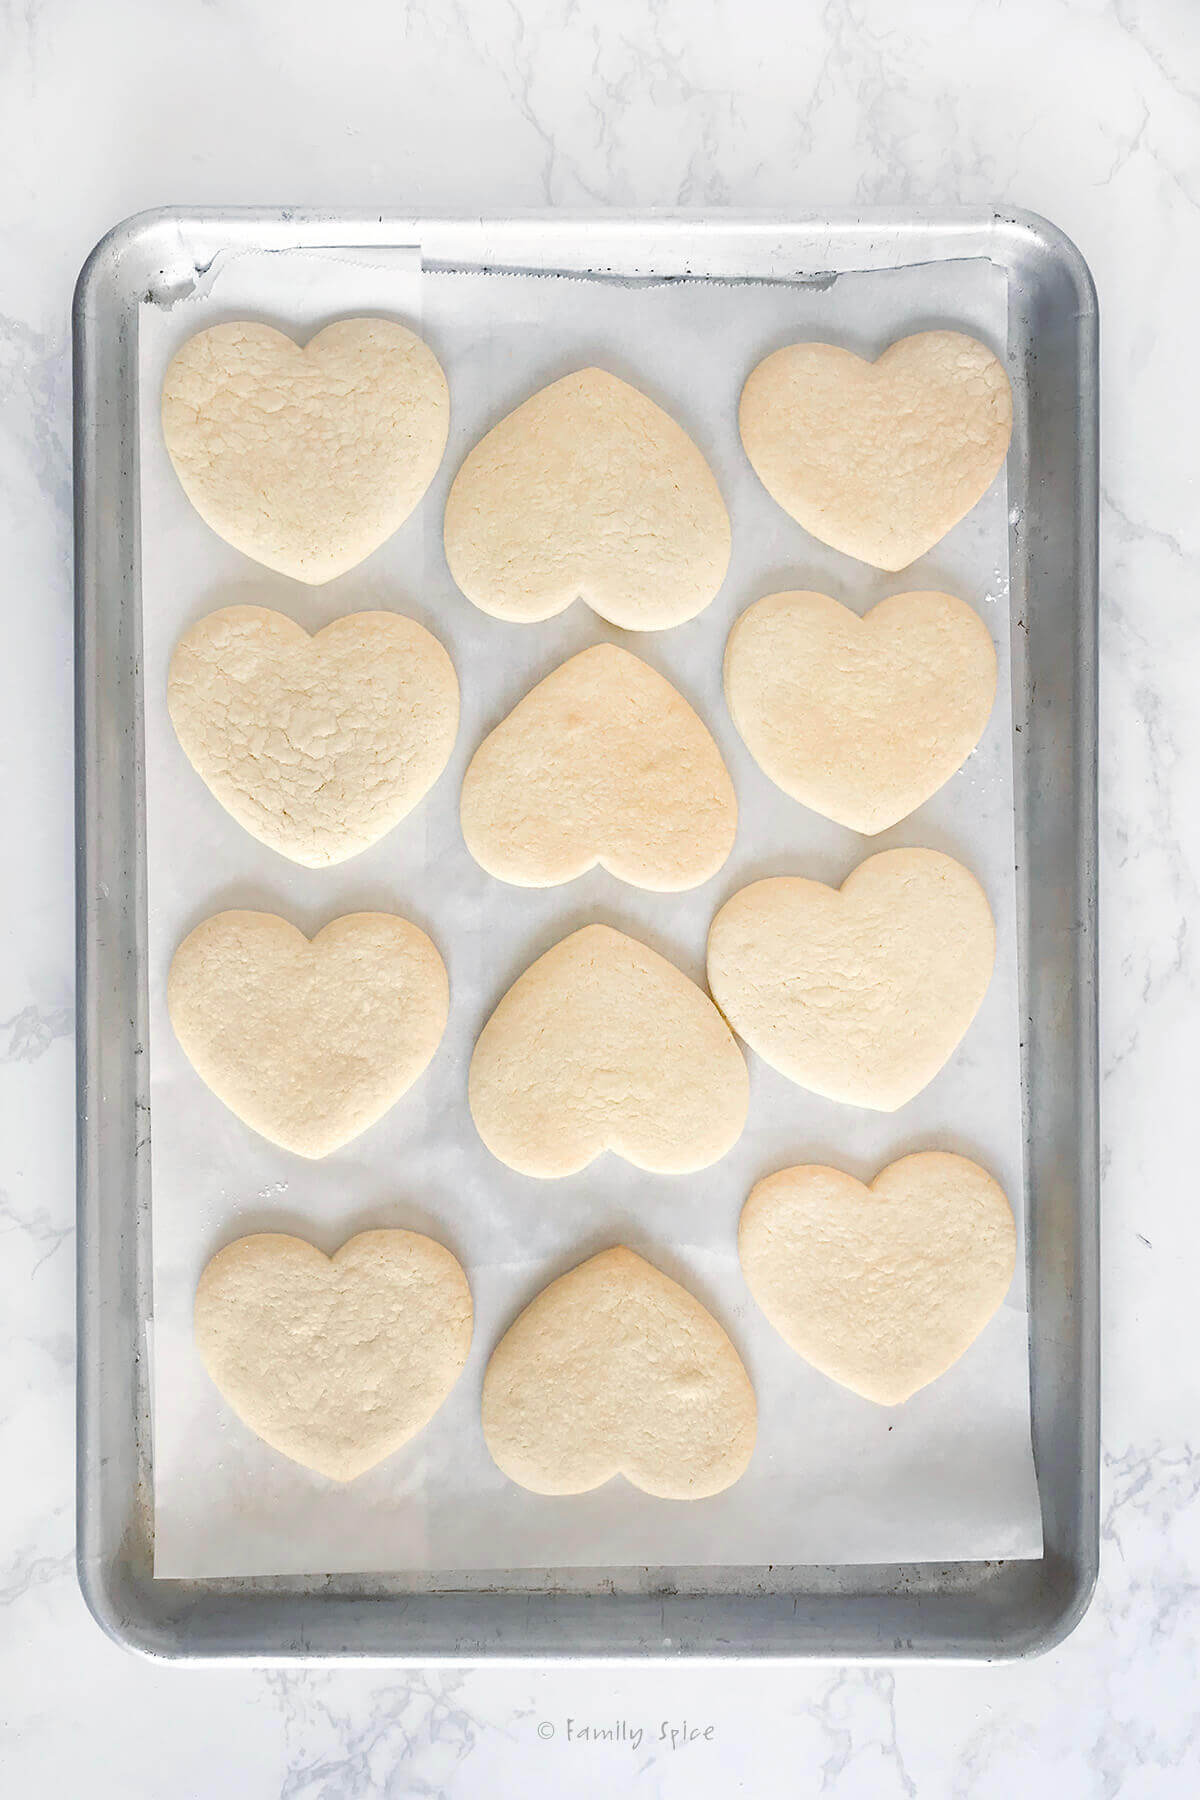 A baking sheet with heart cookies baked on it